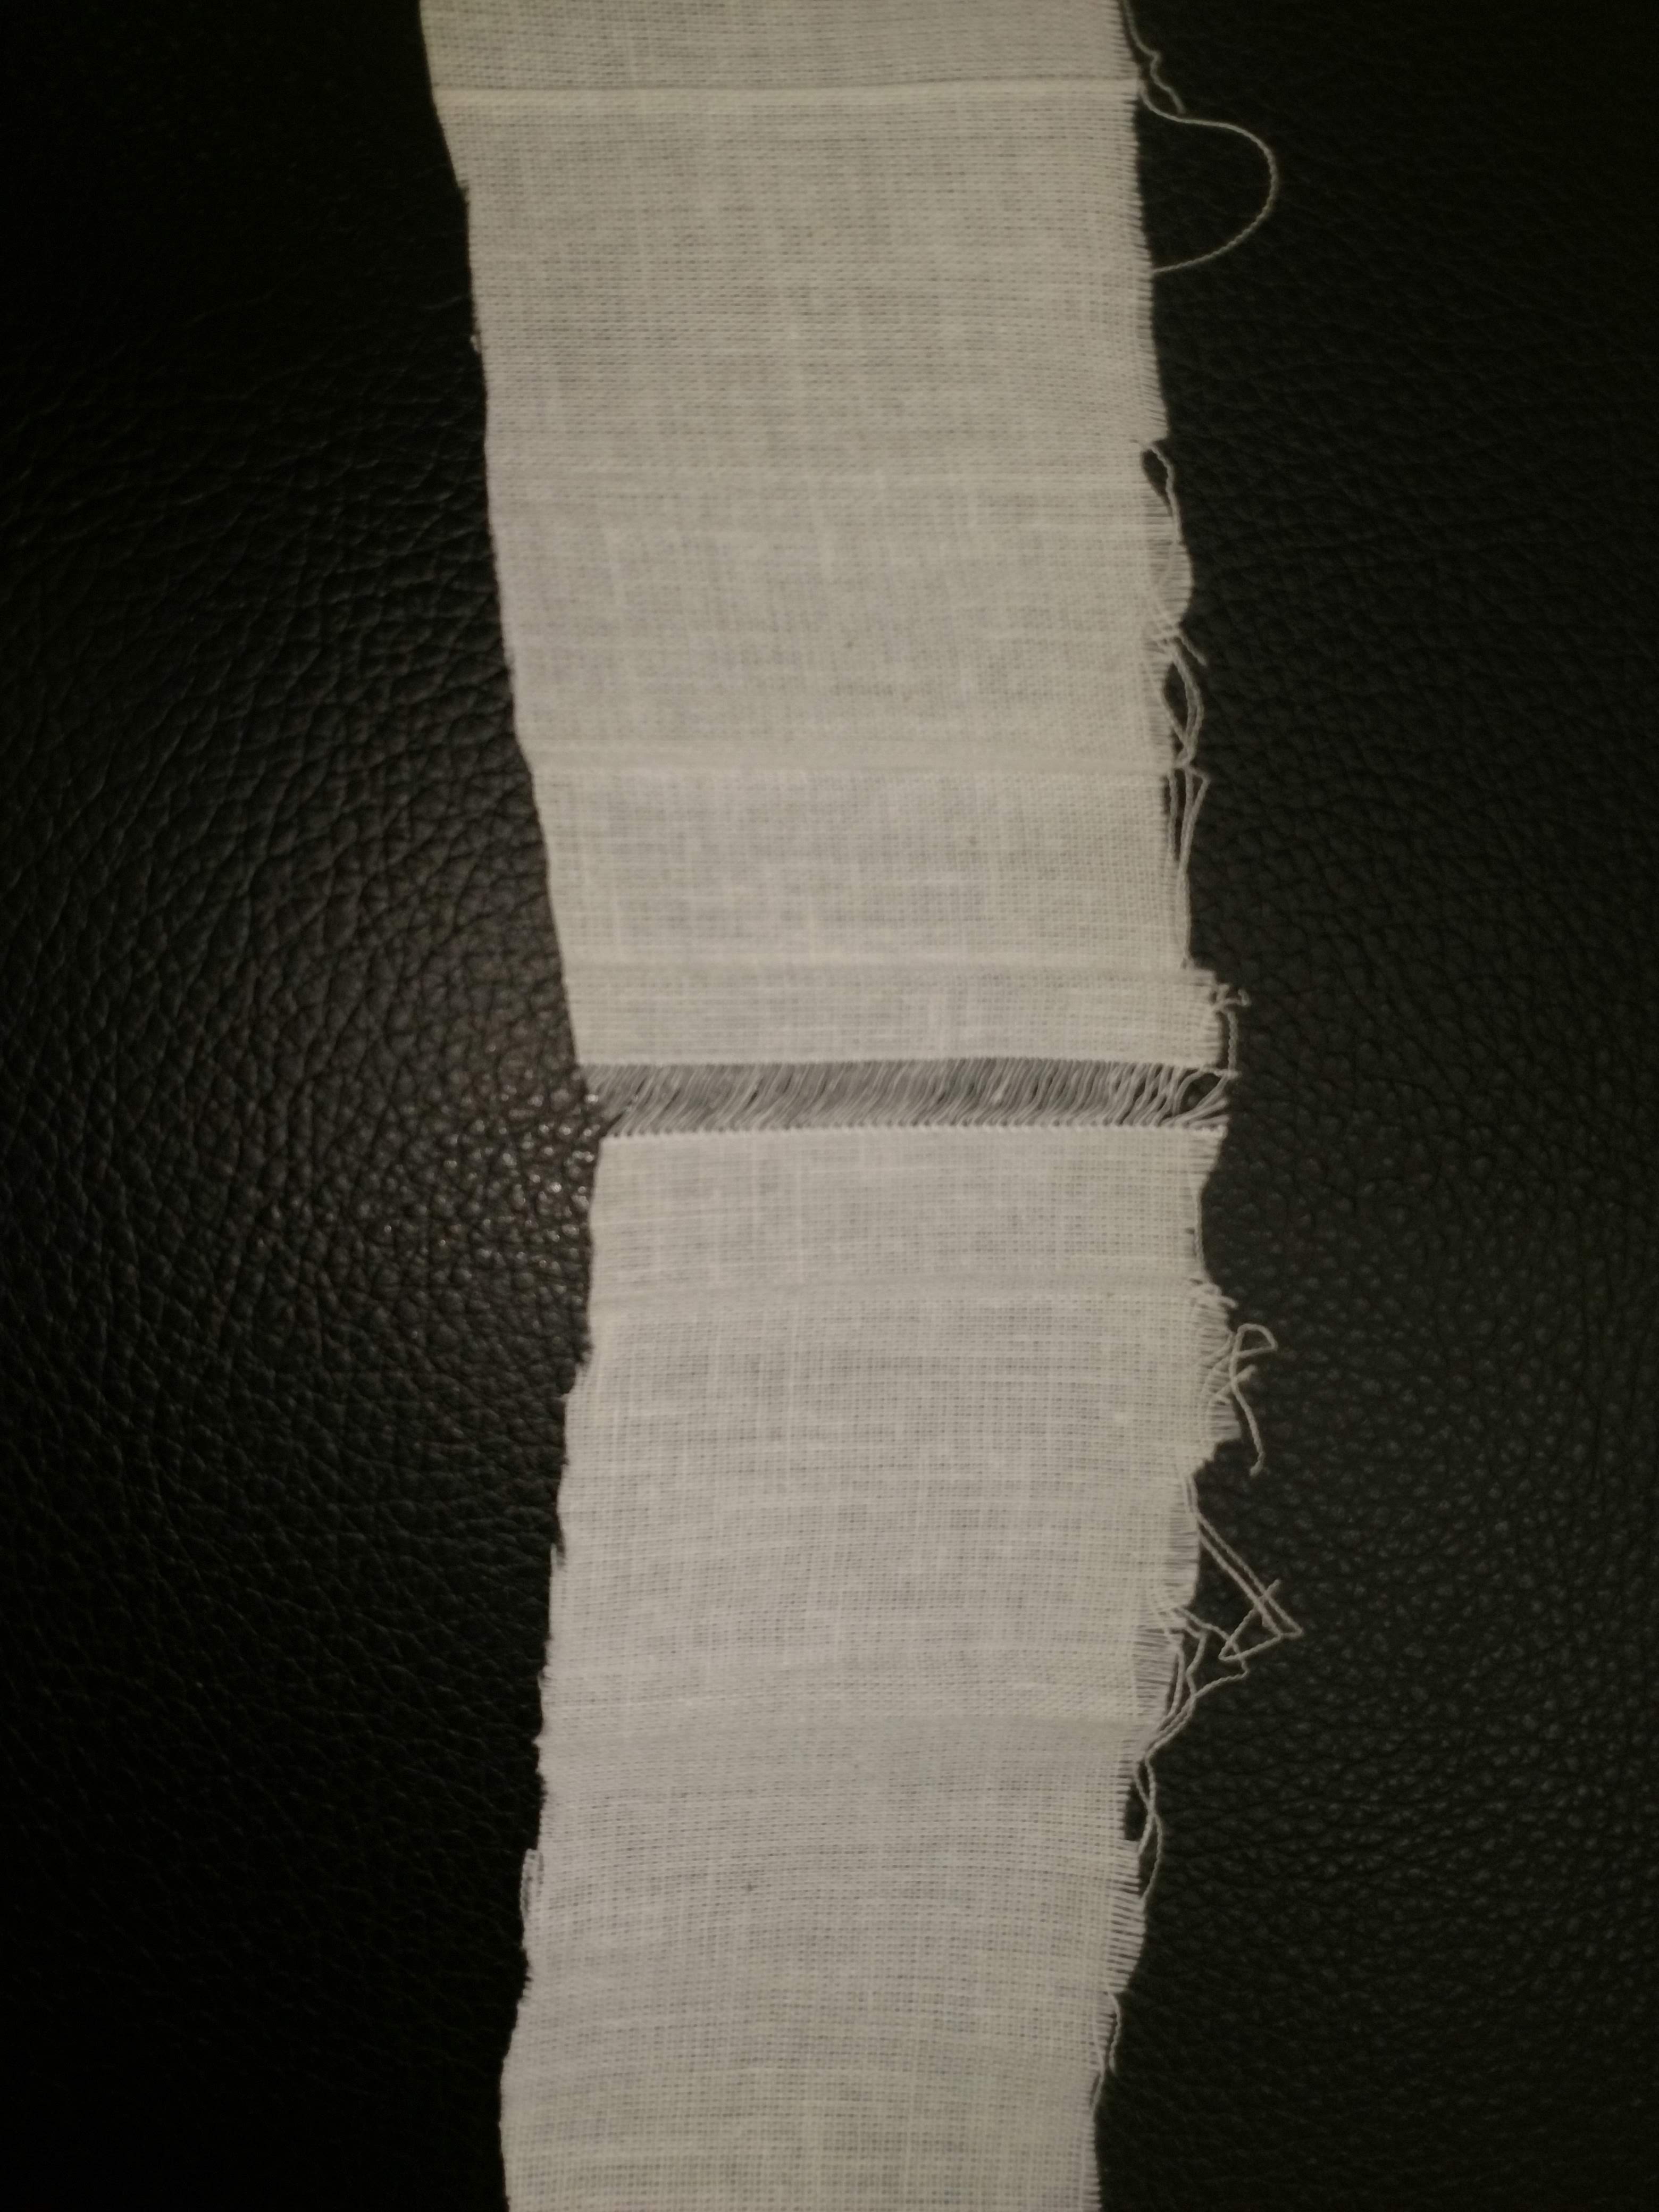 Center Selvage in a Textile Web